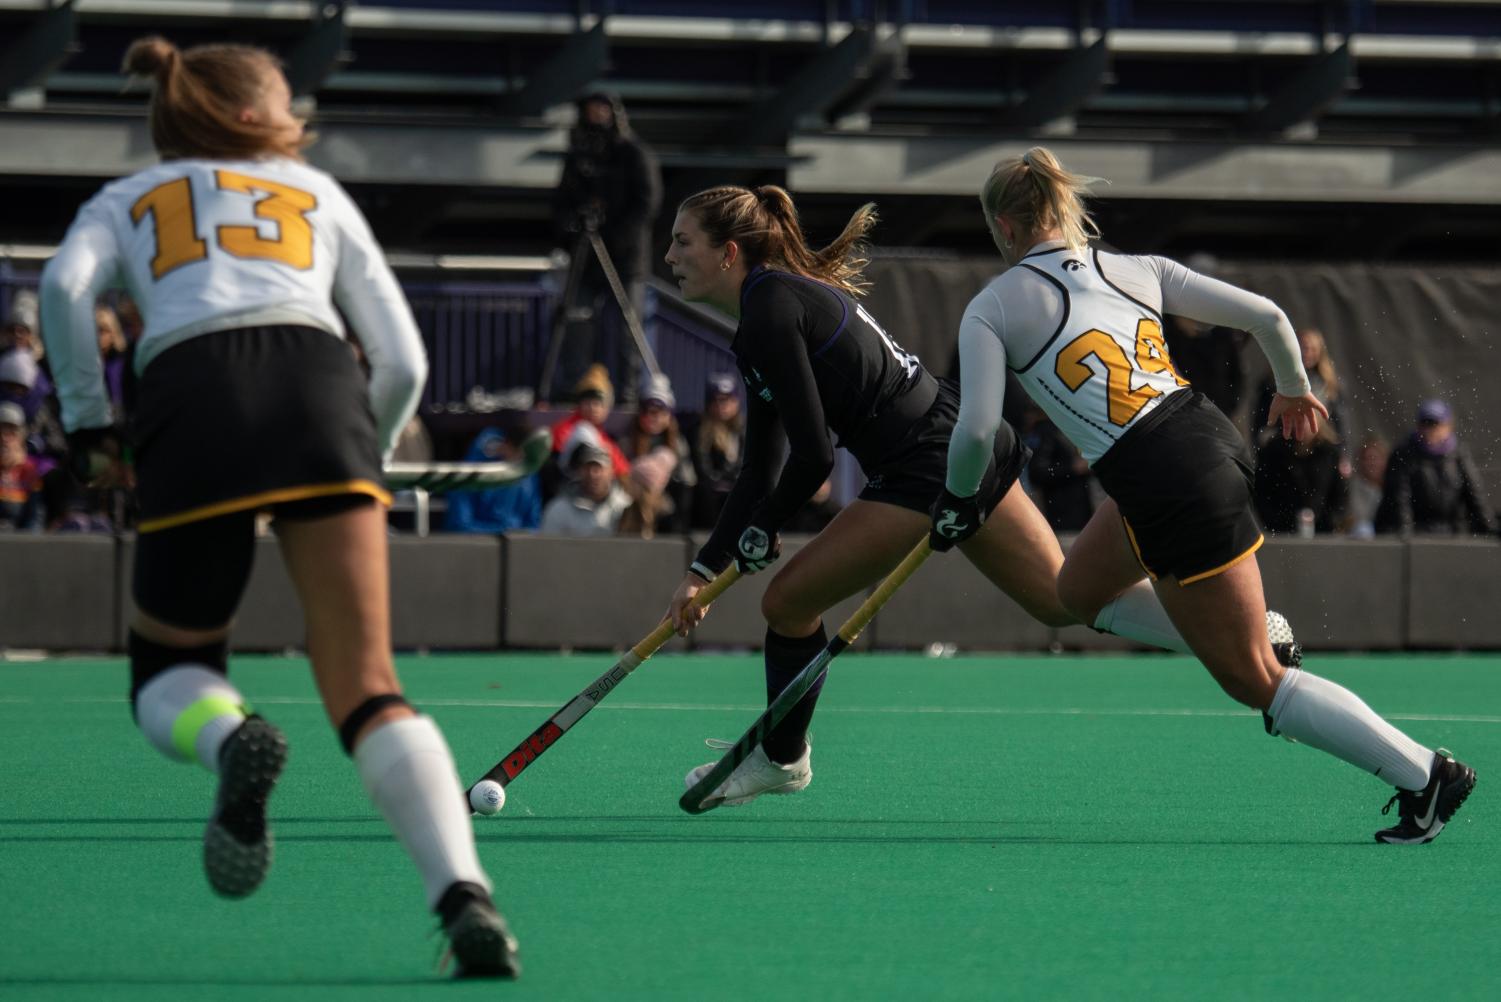 A field hockey player in a black jersey runs and keeps the ball away from players in white jerseys.